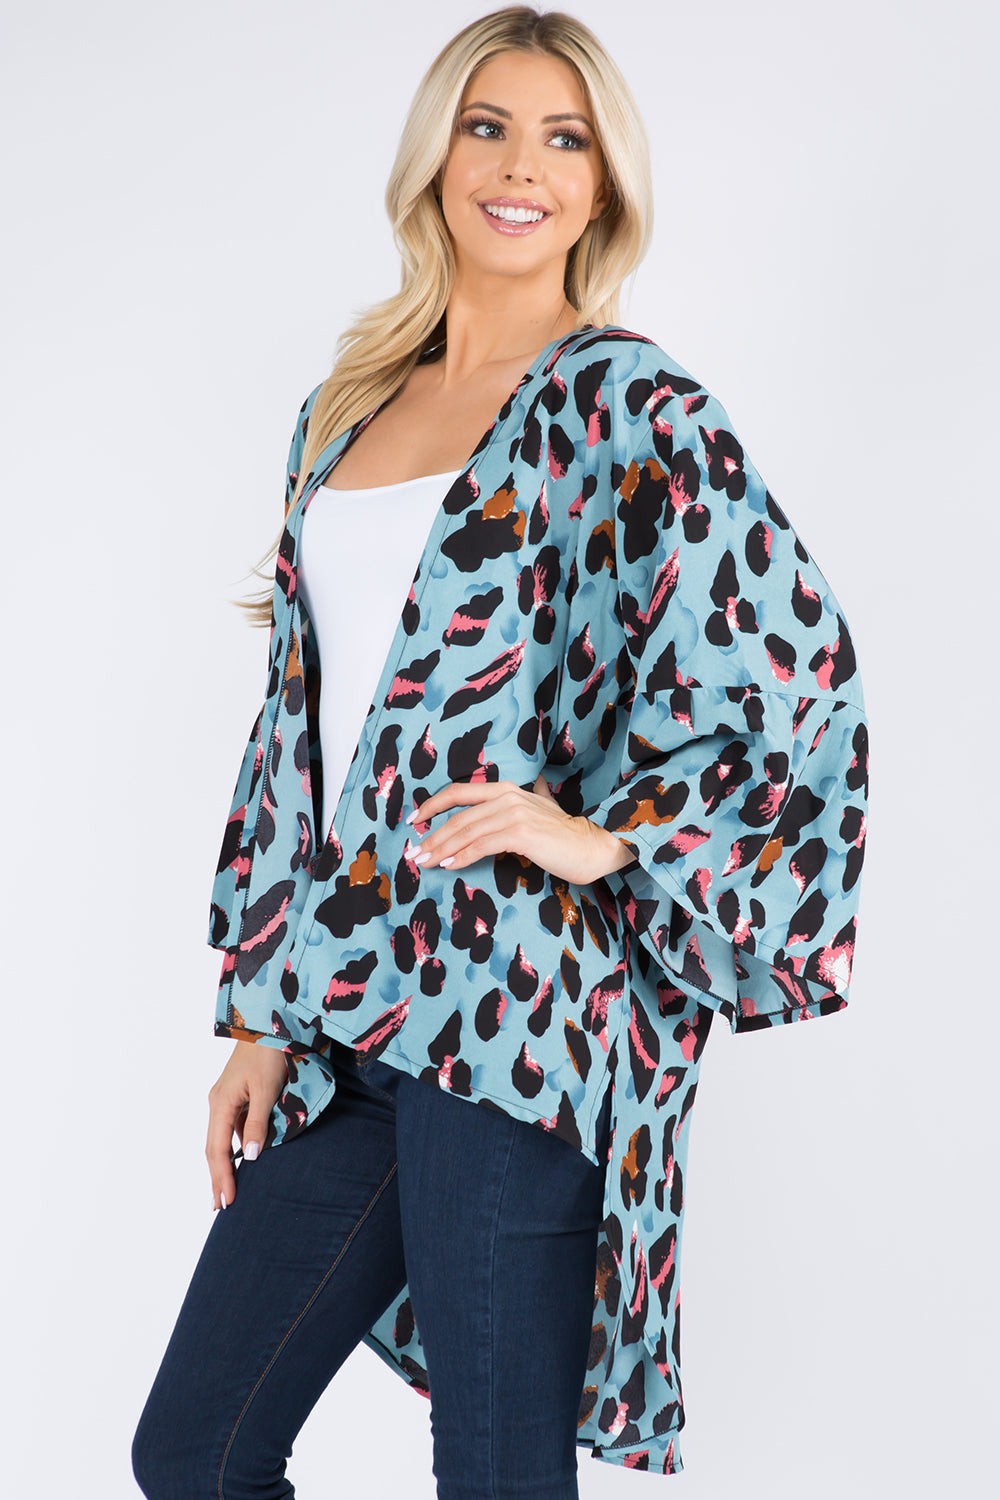 KP-3102 leopard kimono with bellbottom sleeves